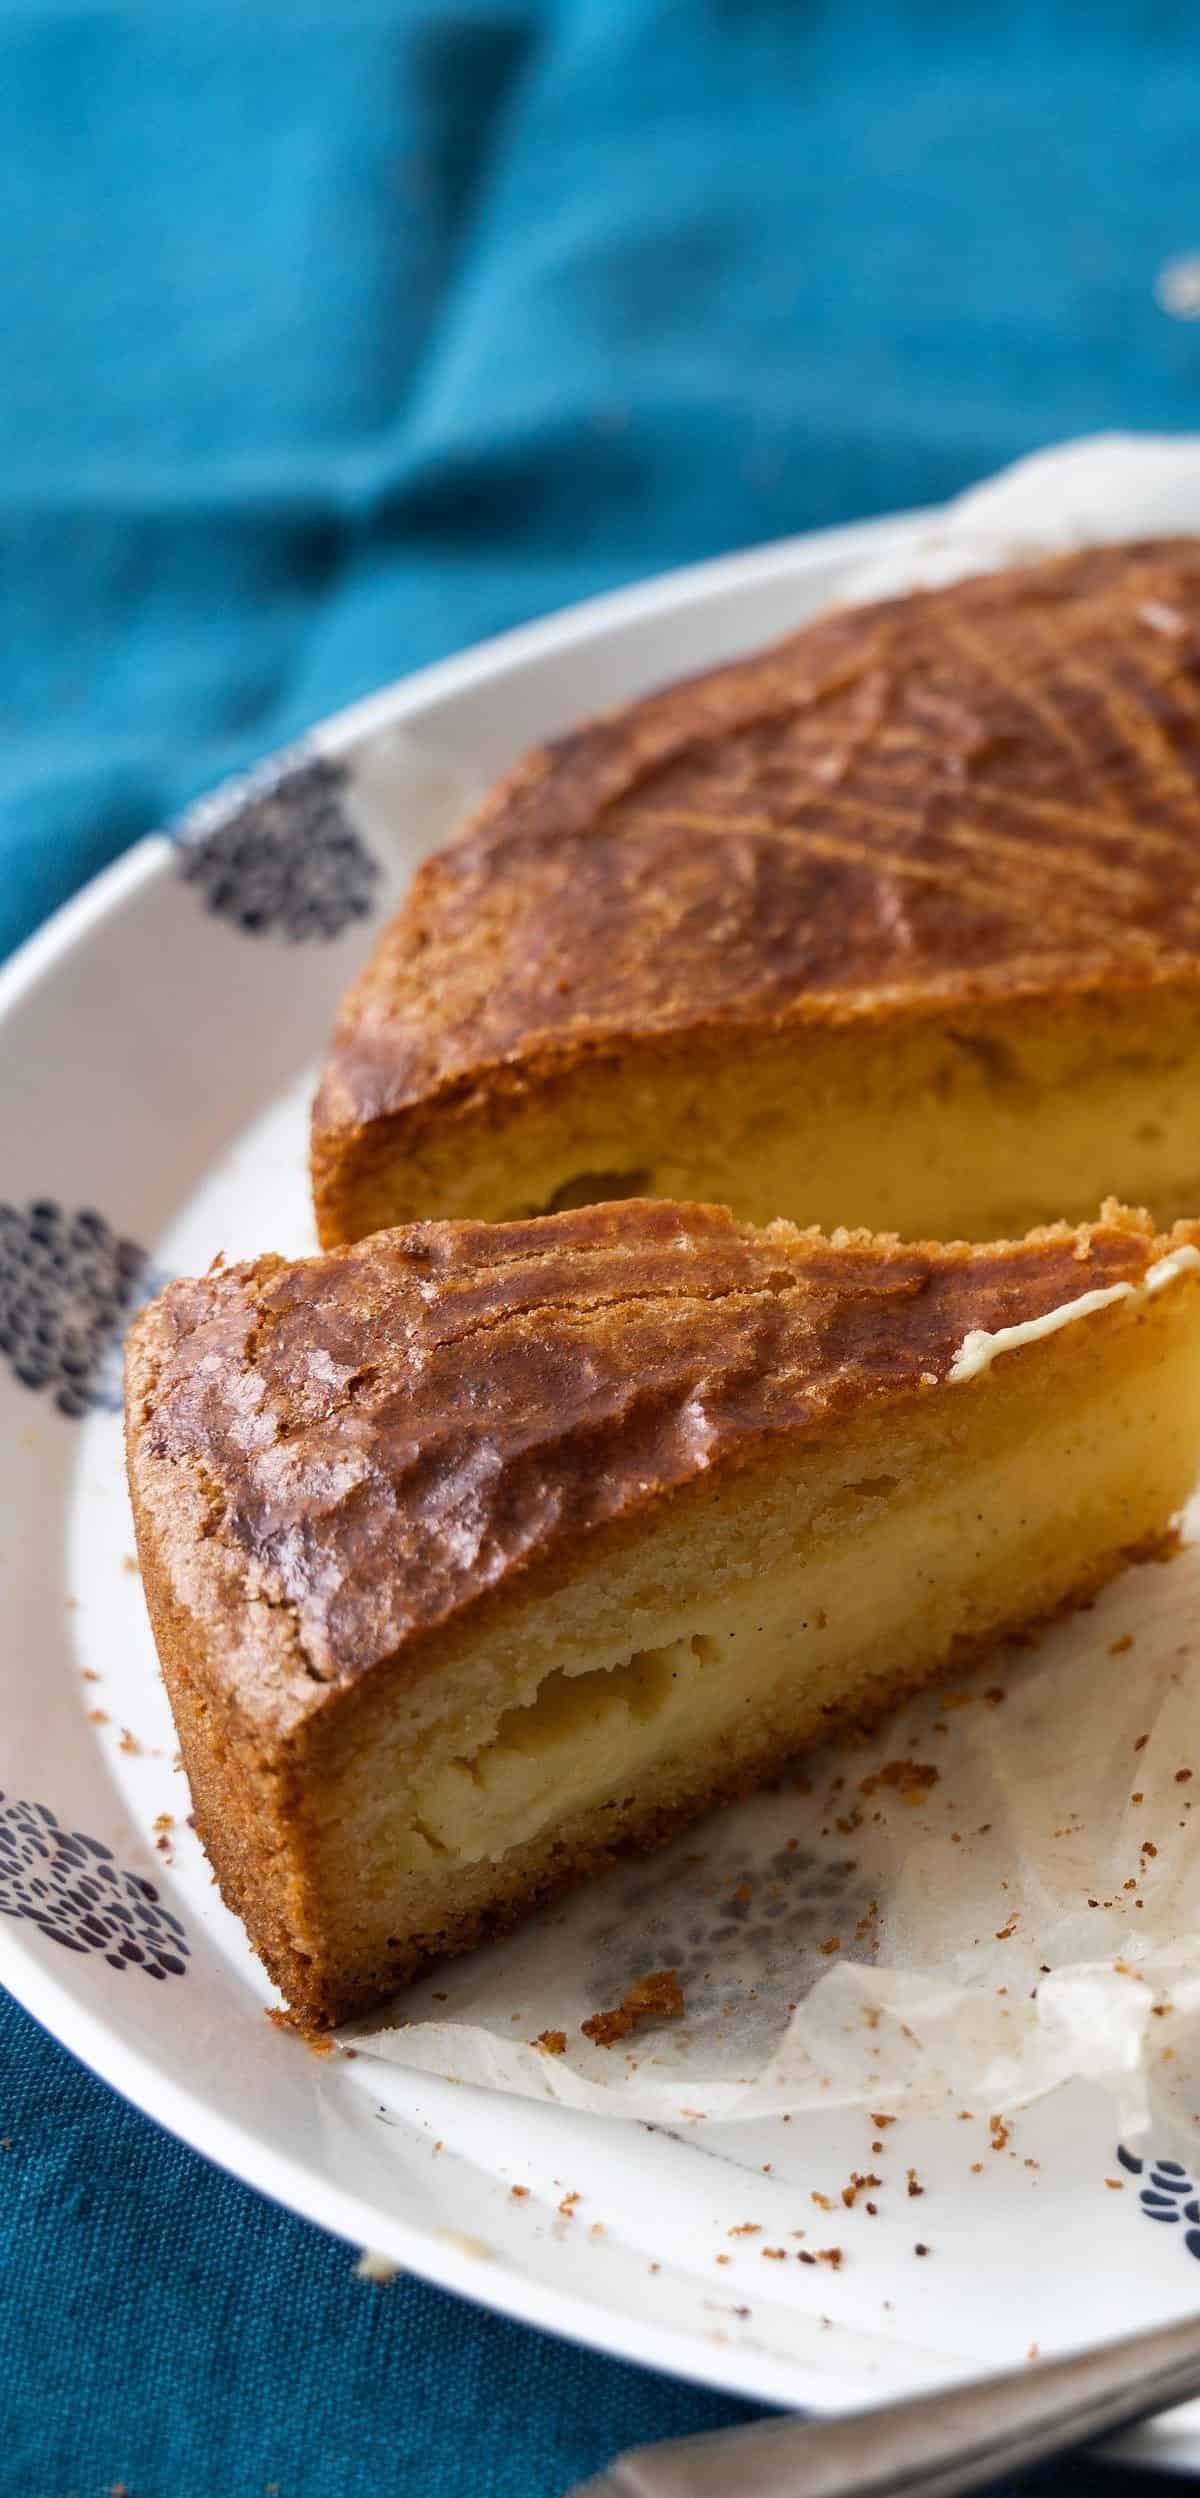  The creamy pastry cream oozes out of the buttery crust with every bite.